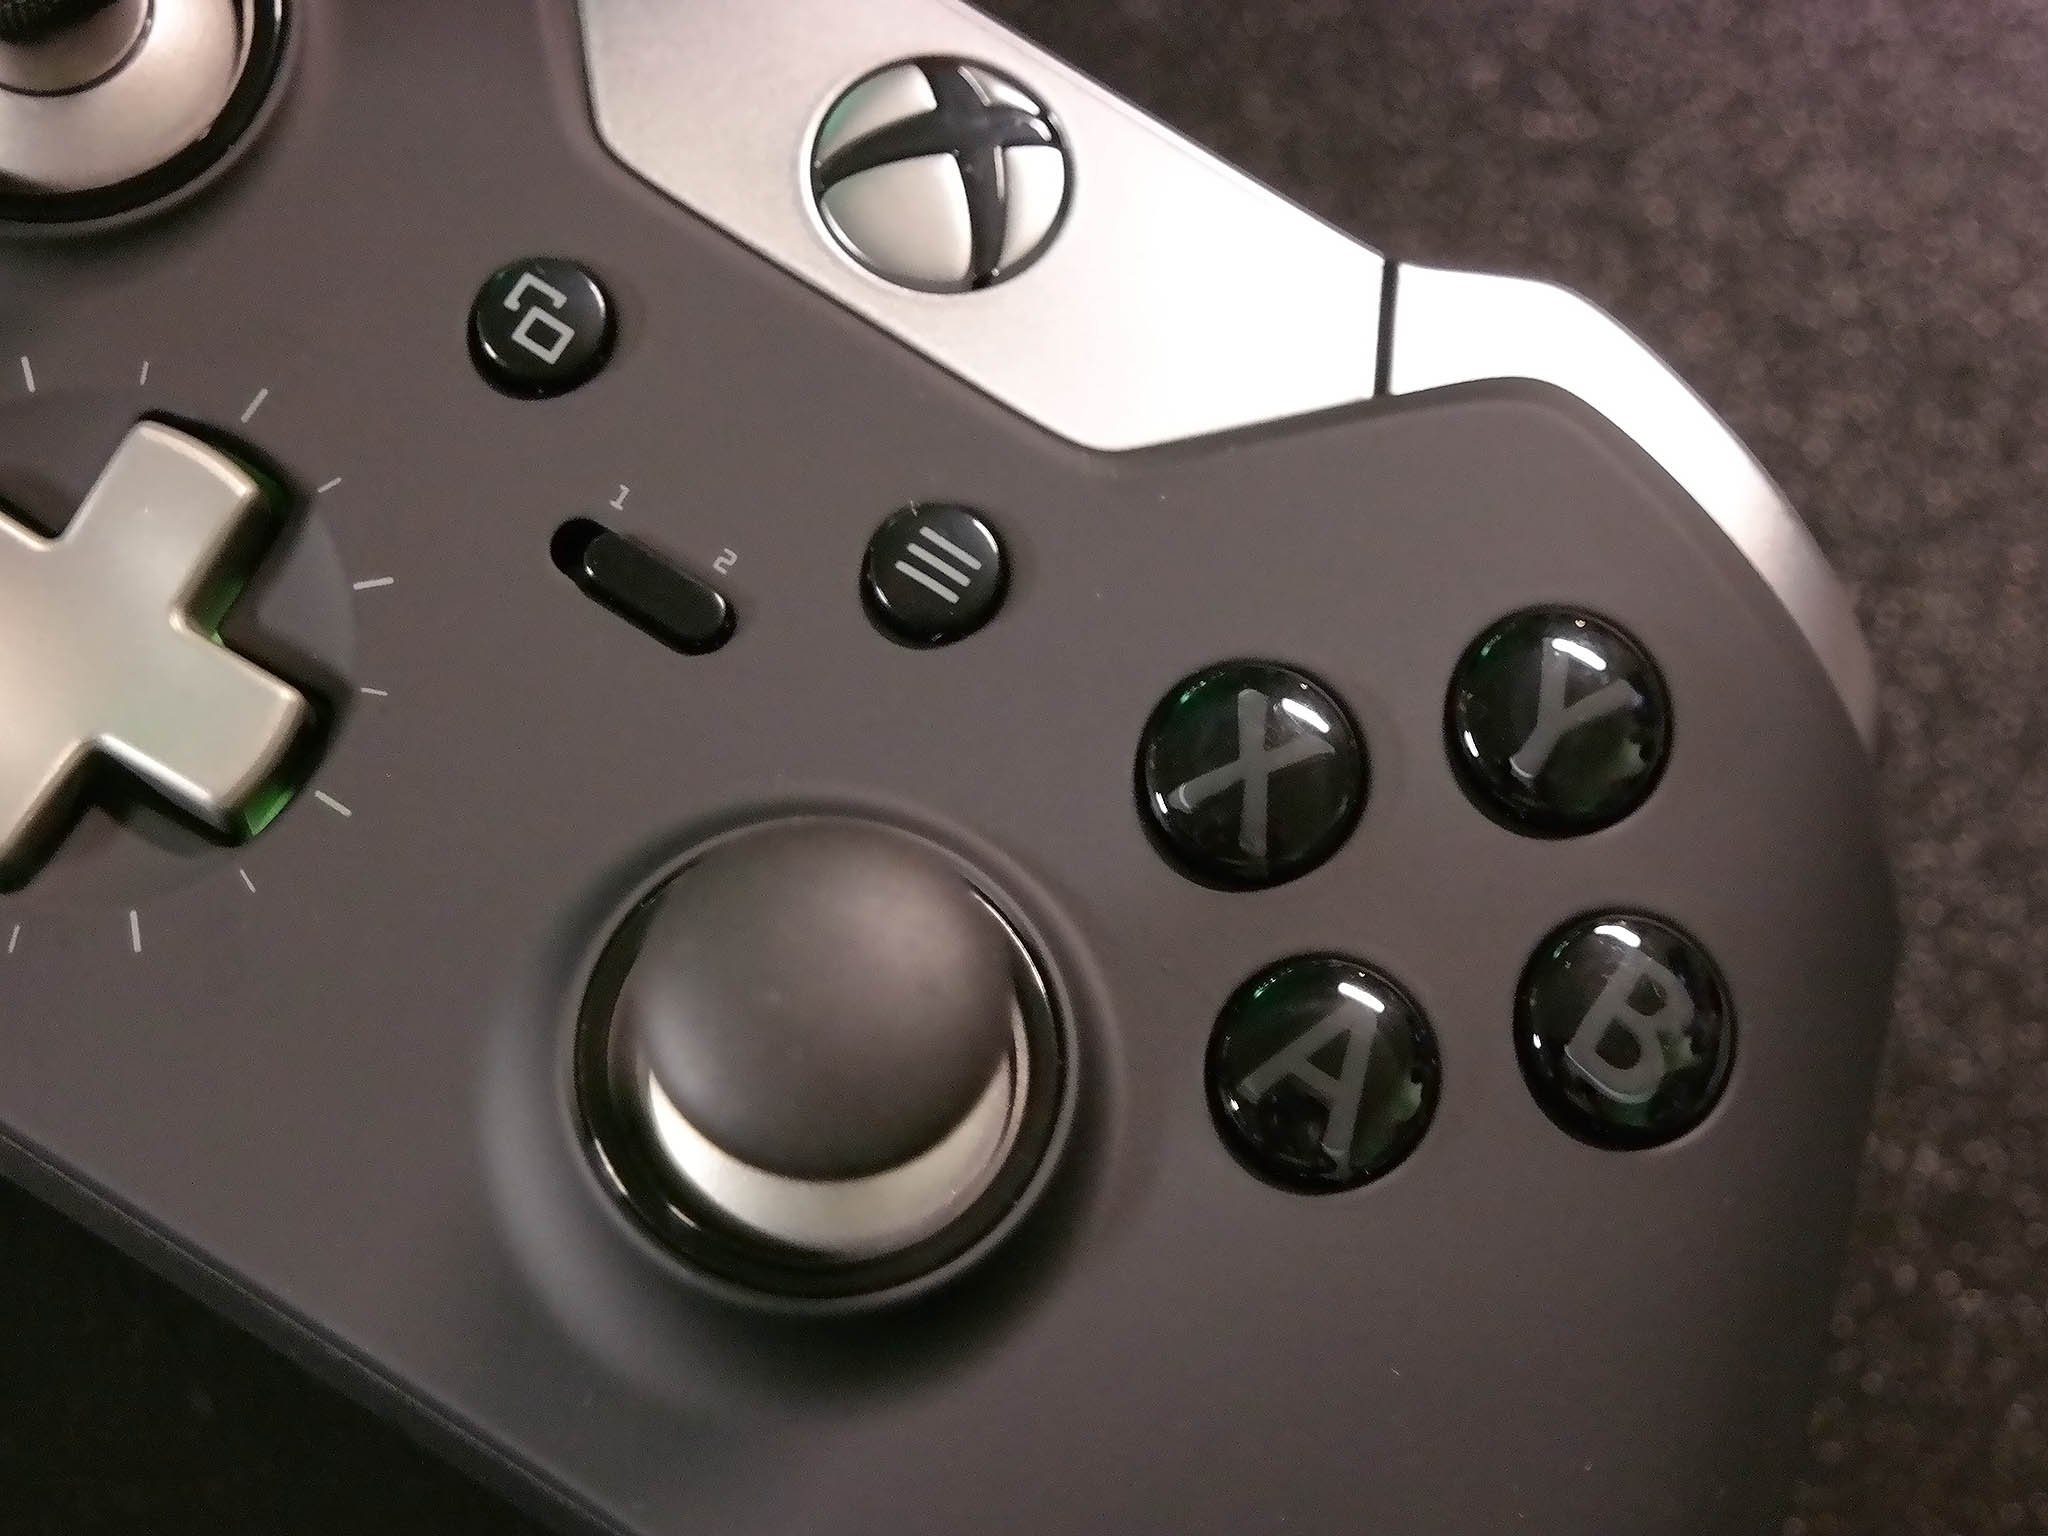 New 49 Xbox 'Washburn' controller reportedly launching in October